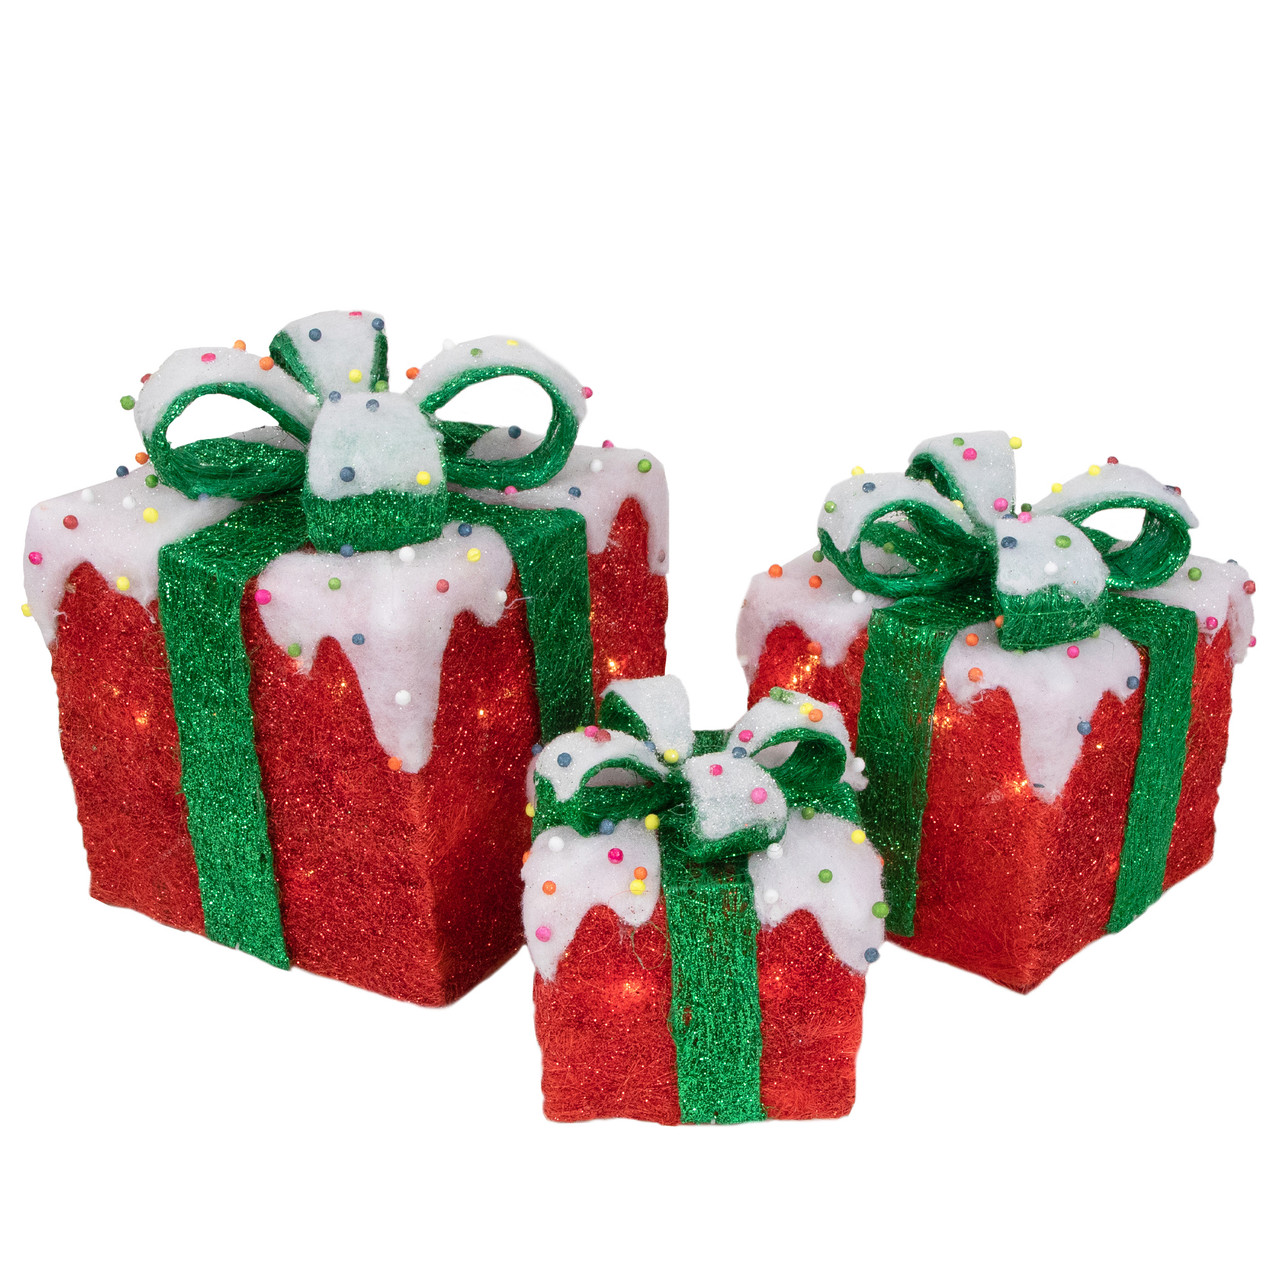 Set of 3 Iridescent Christmas Gift Box with Iridescent Bows